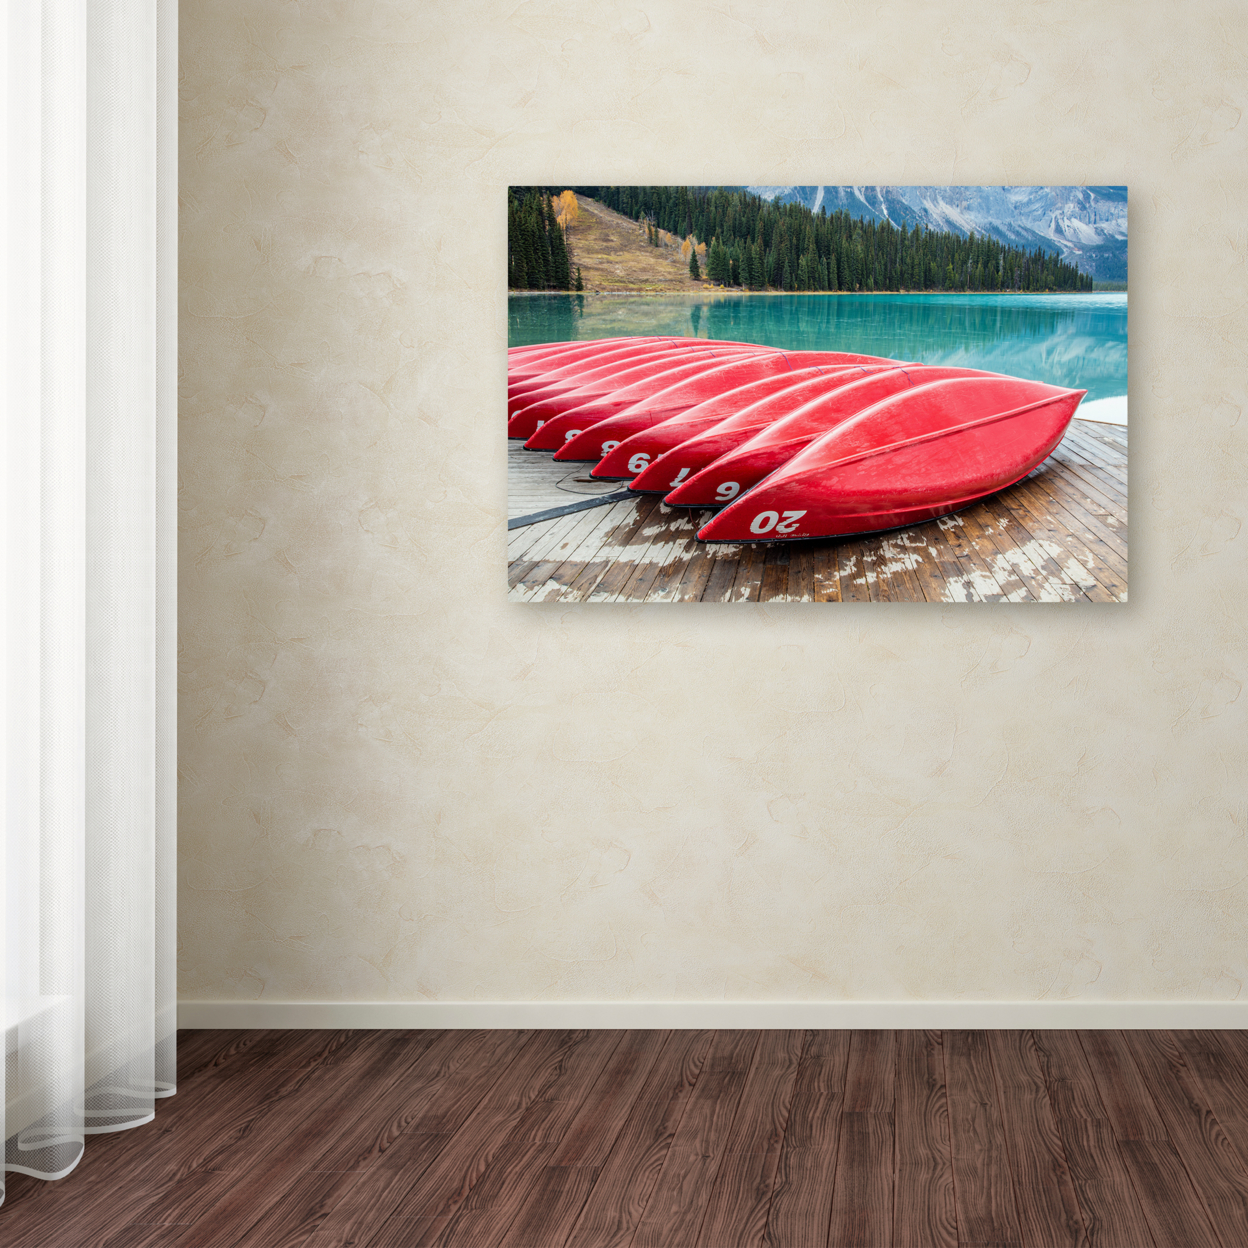 Pierre Leclerc 'Red Canoes Of Emerald Lake' Canvas Art 16 X 24